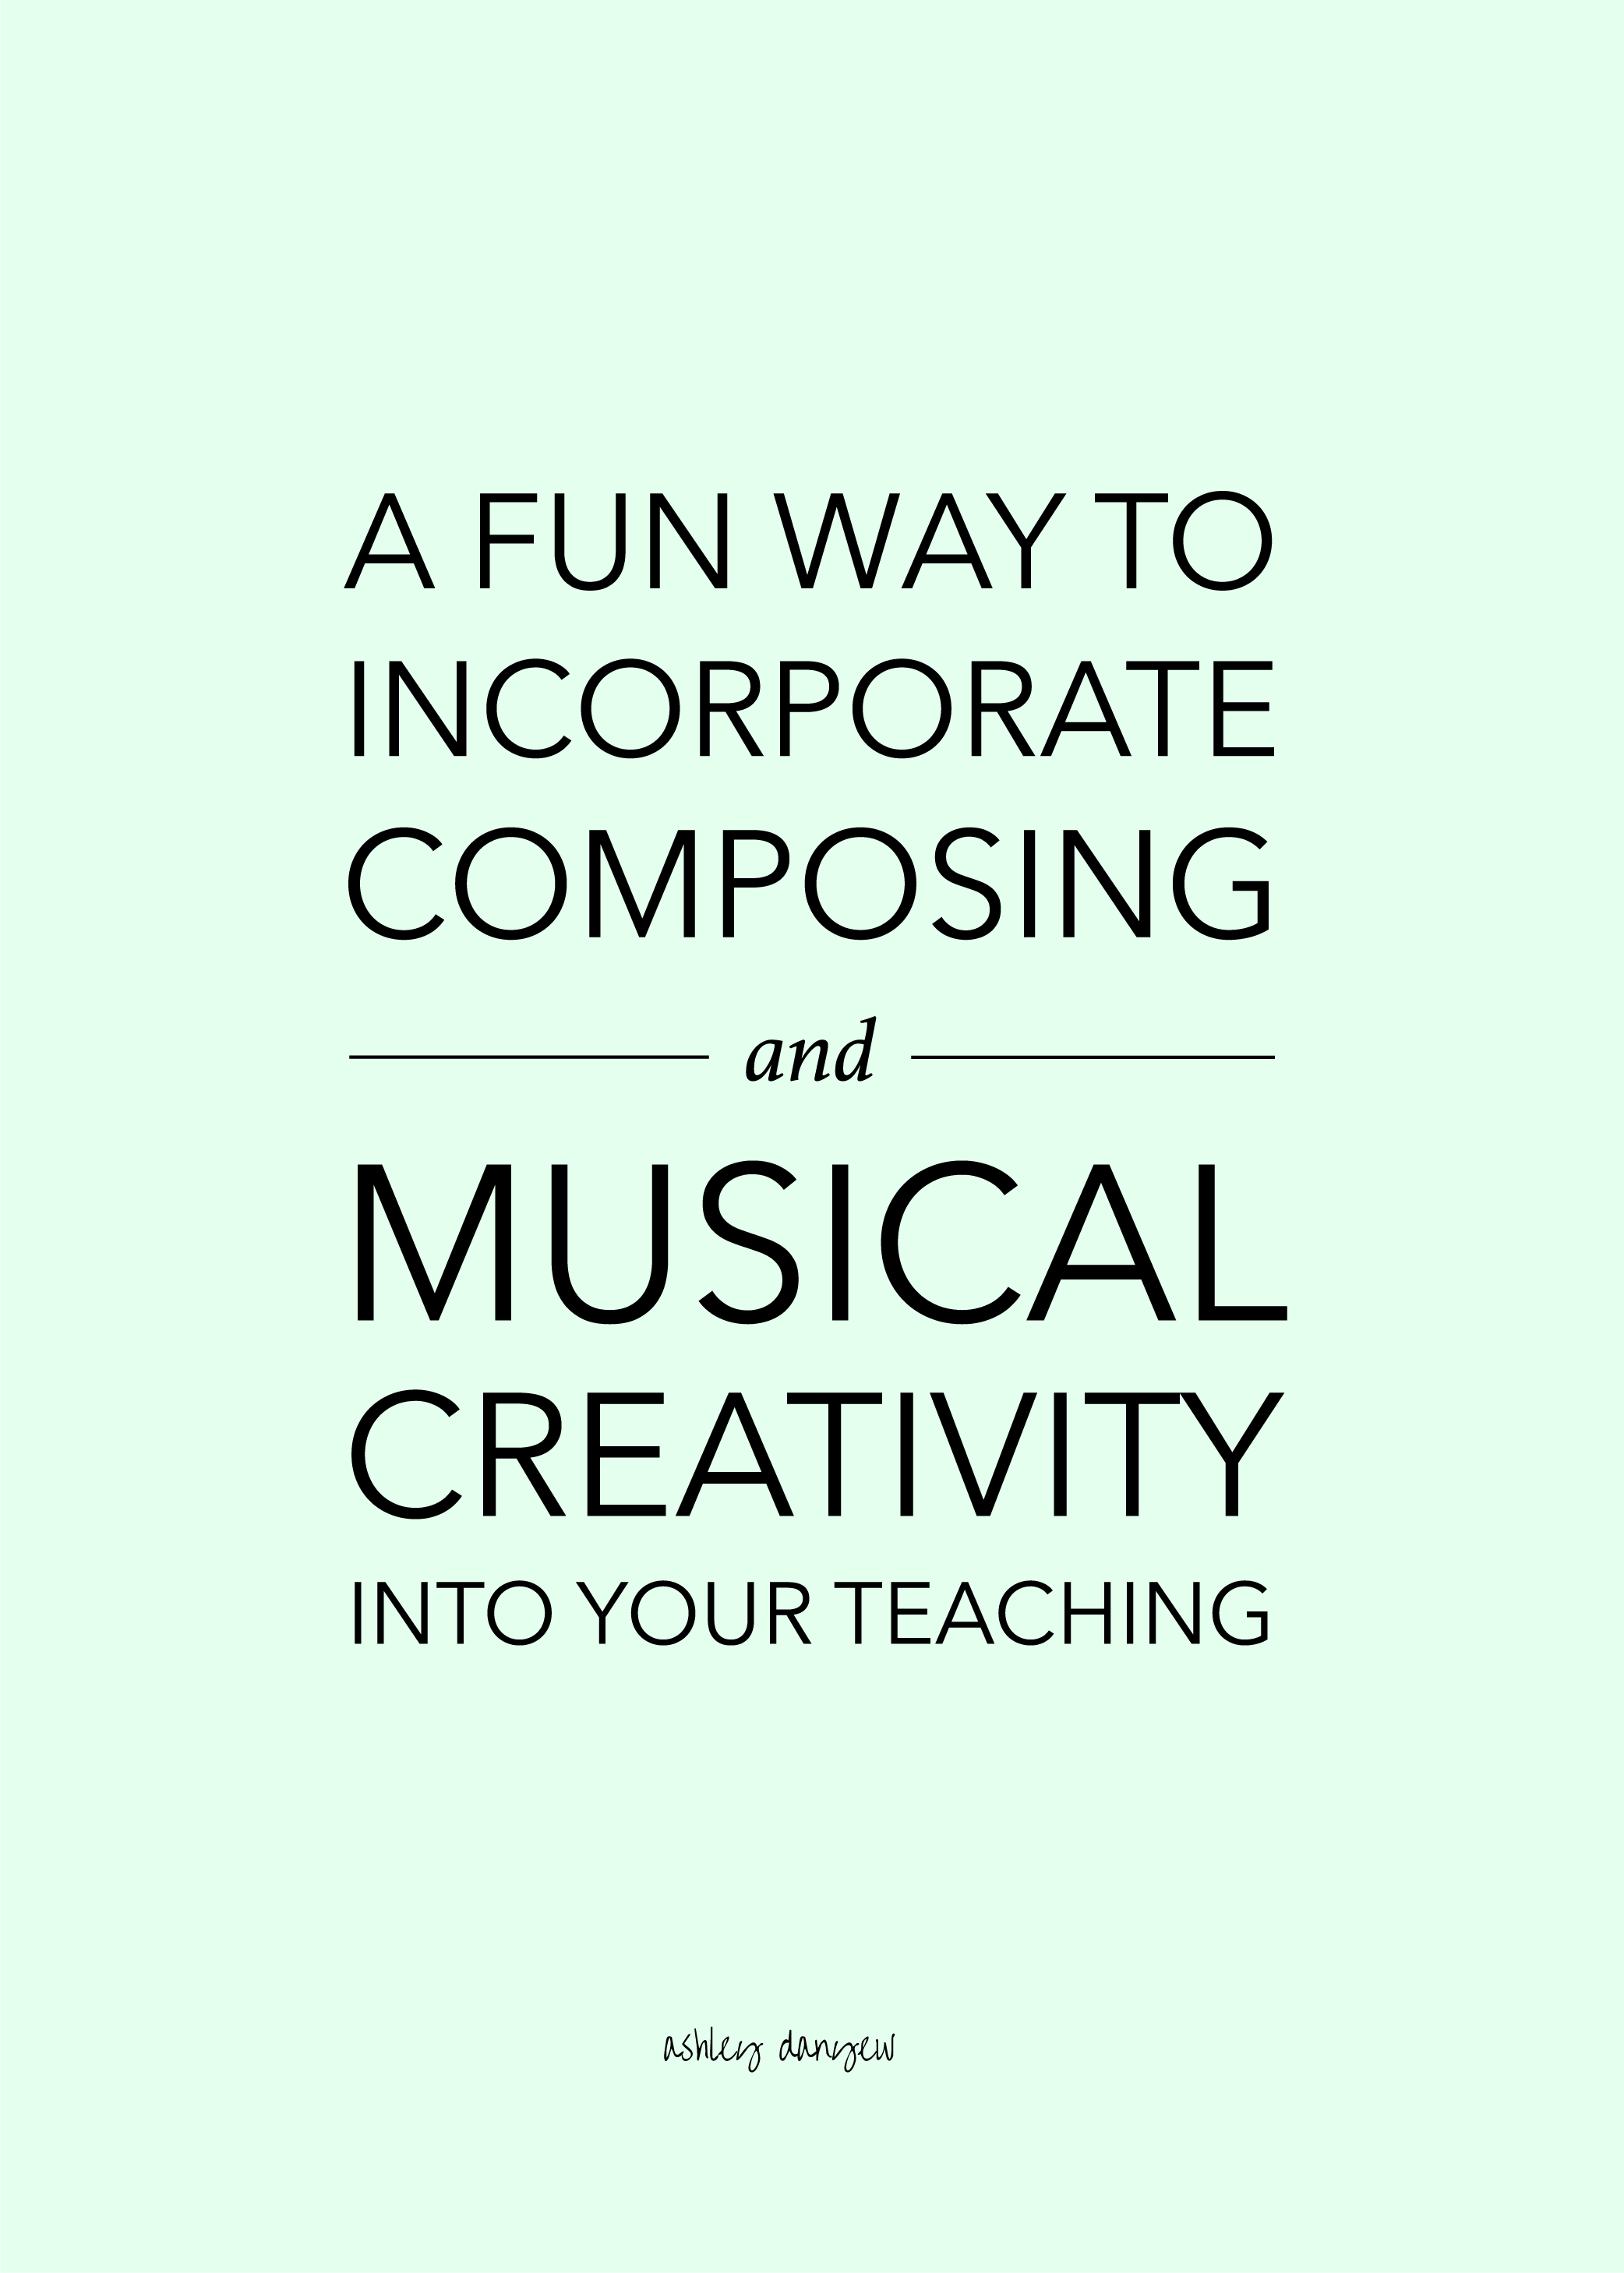 A Fun Way to Incorporate Composing and Musical Creativity into Your Teaching